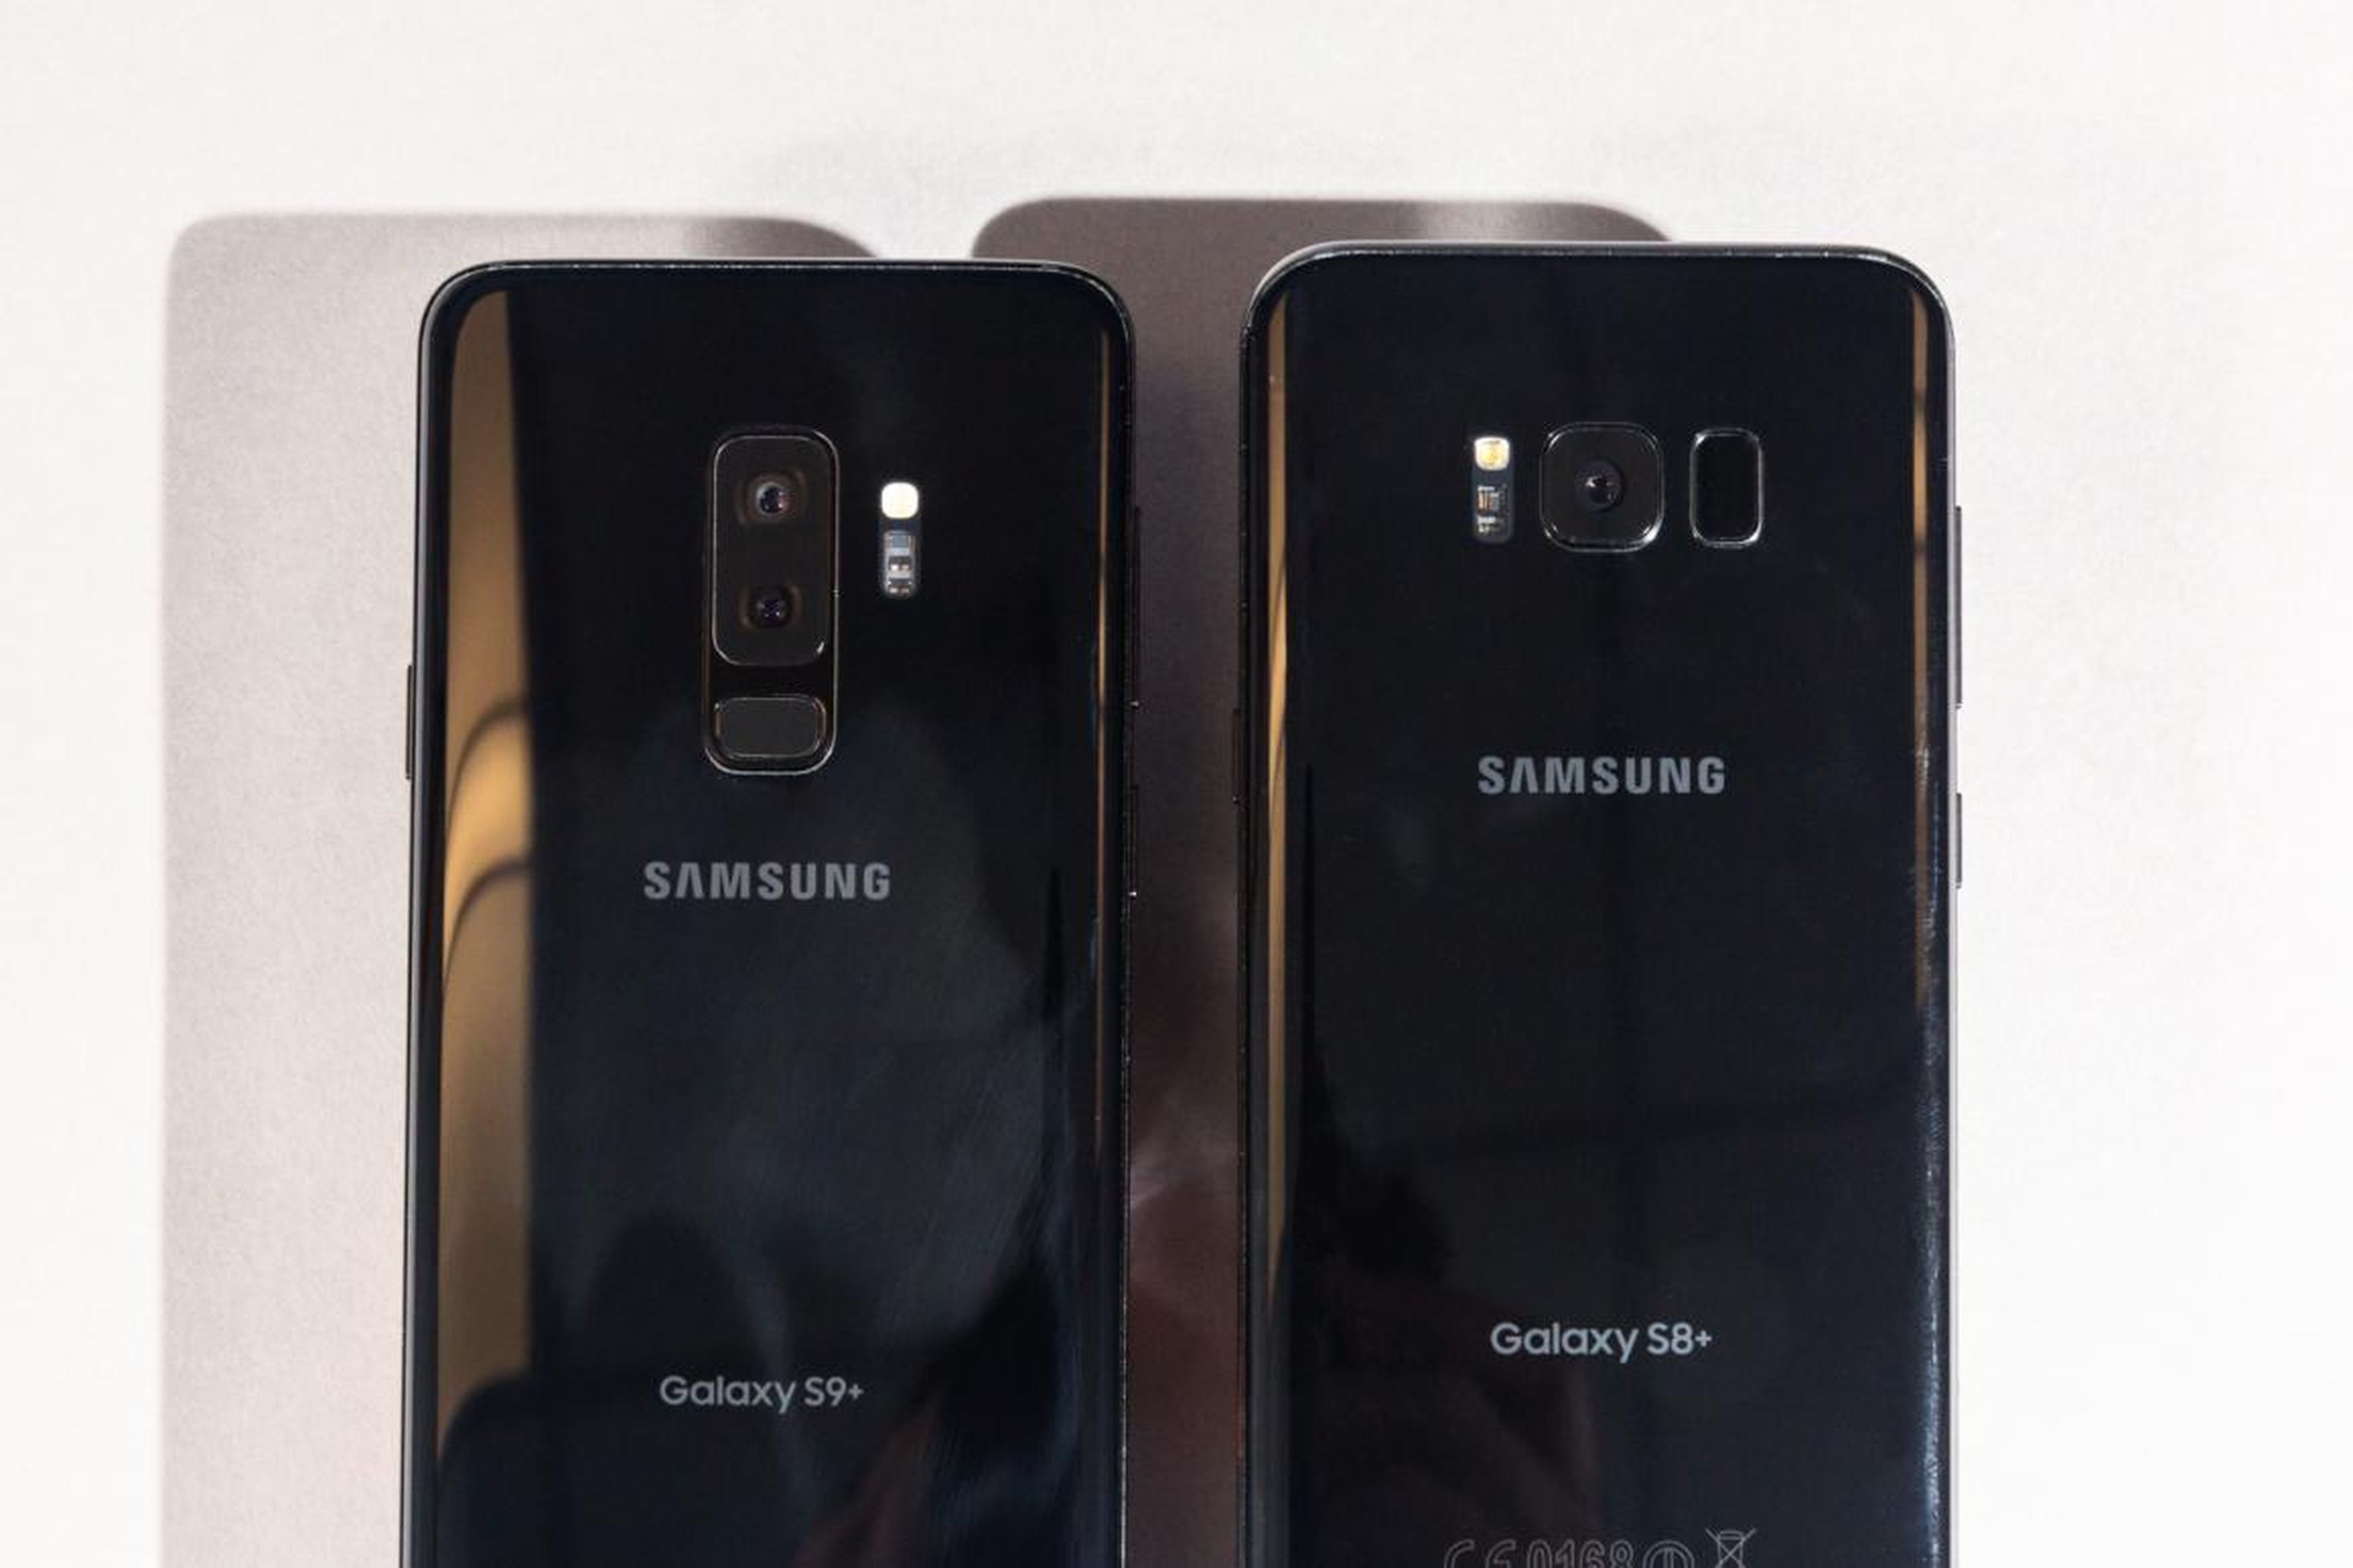 The Galaxy S9 also costs less — it starts at $720, and can cost as much as $960.